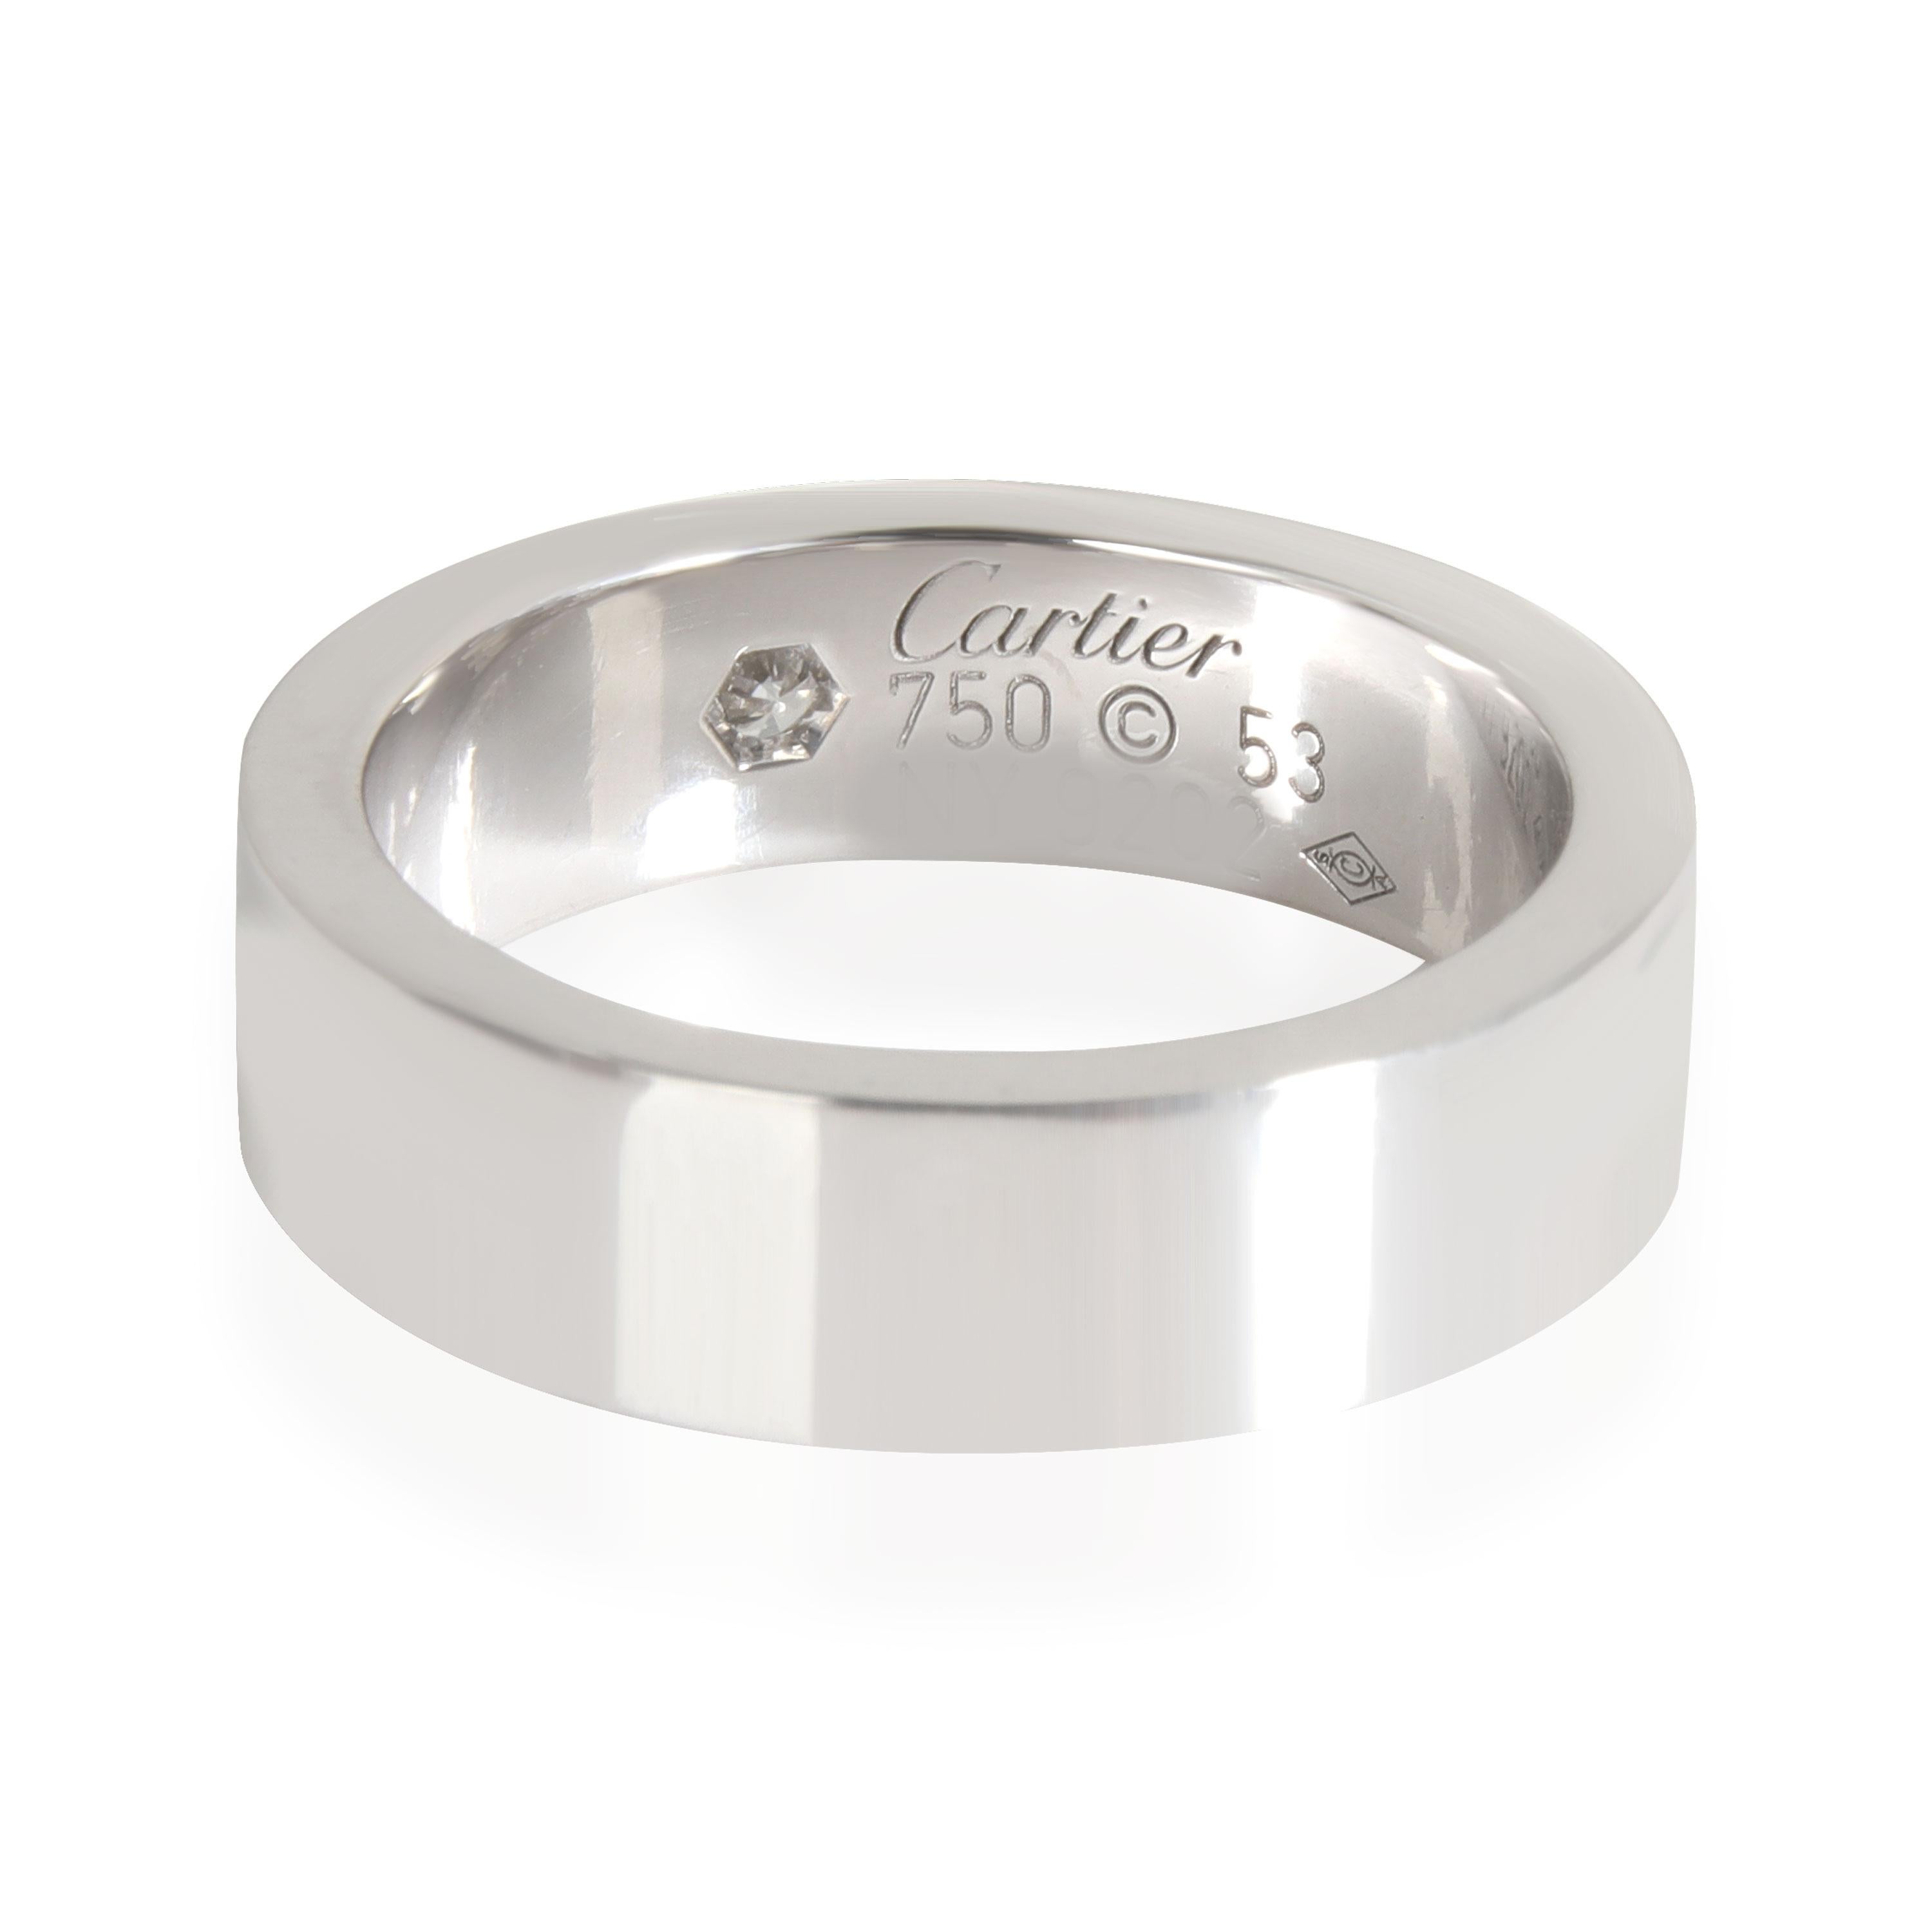 
Cartier Love Diamond Band in 18k White Gold 0.06 CTW

PRIMARY DETAILS
SKU: 112853
Listing Title: Cartier Love Diamond Band in 18k White Gold 0.06 CTW
Condition Description: Retails for 2950 USD. In excellent condition and recently polished. Cartier